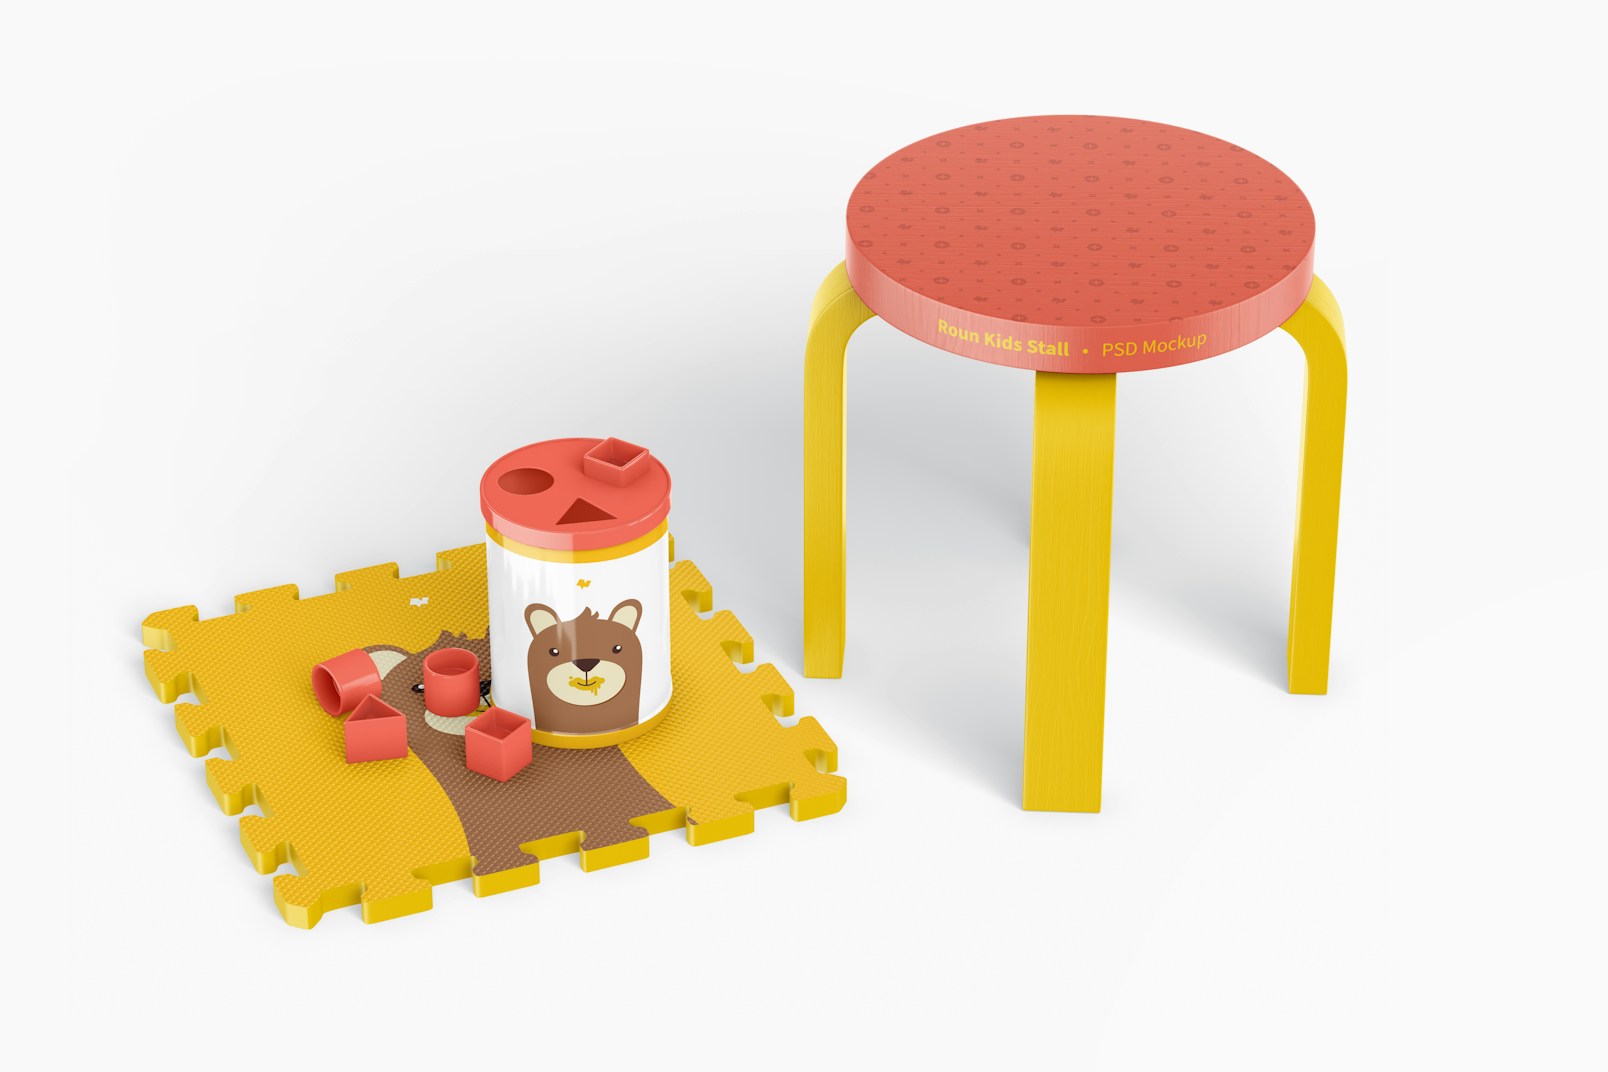 Round Kids Stall with Toys Mockup